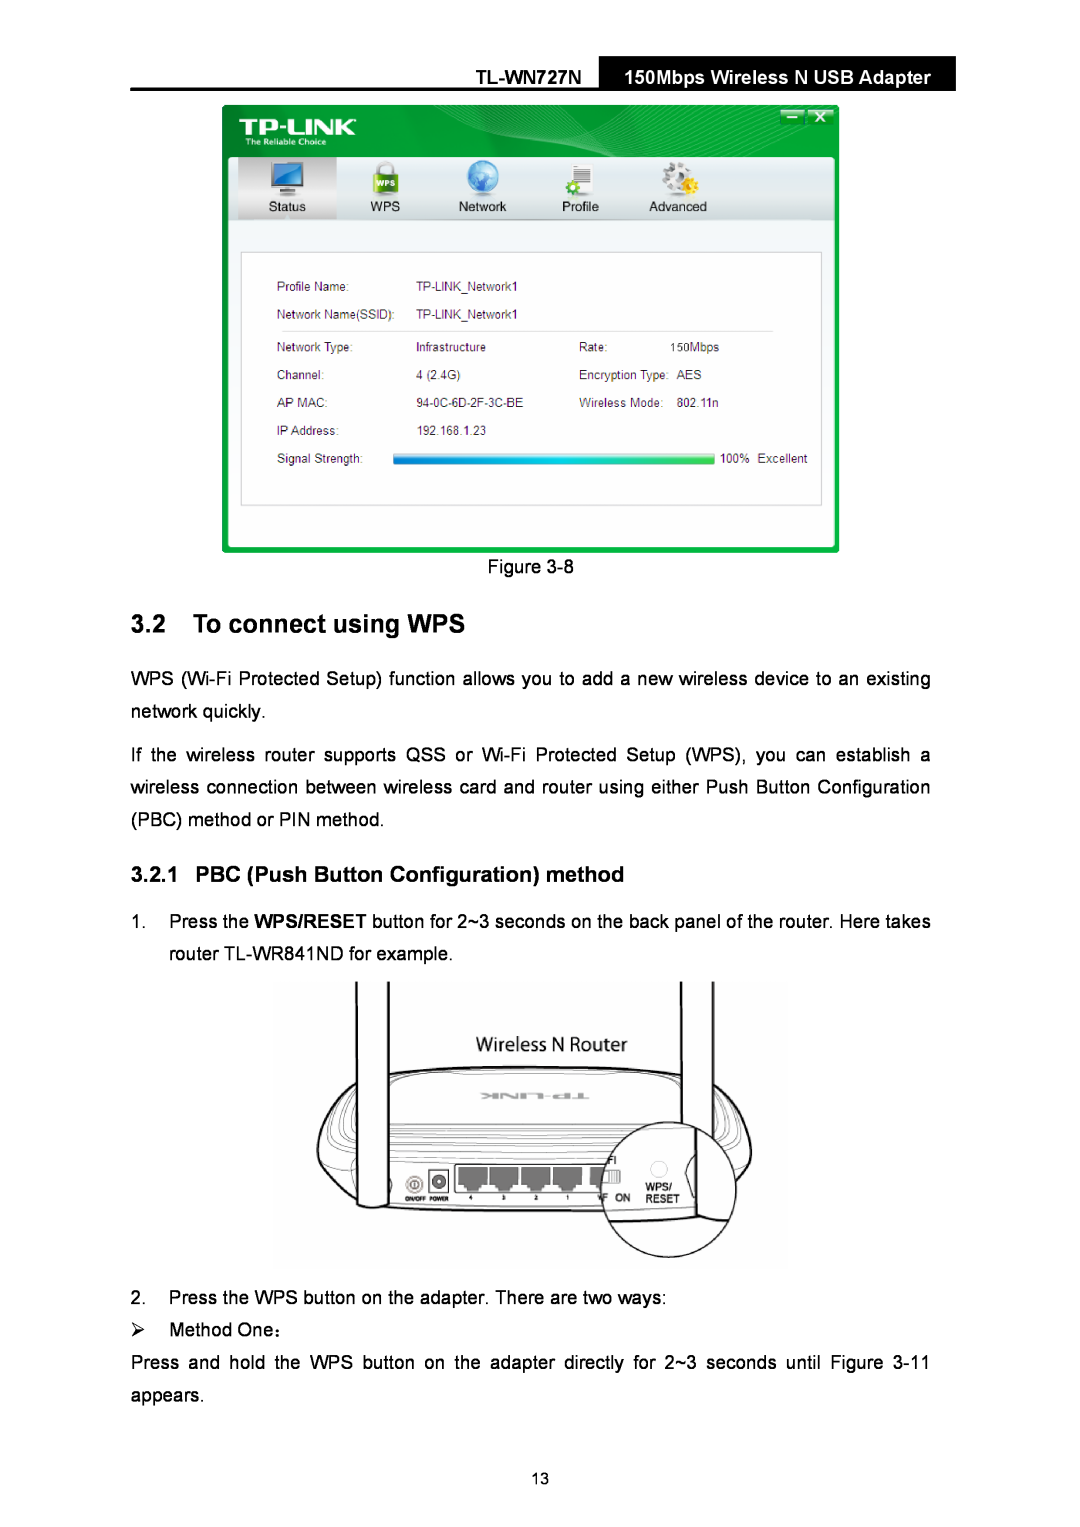 TP-Link TL-WN727N manual To connect using WPS, PBC Push Button Configuration method, 150Mbps Wireless N USB Adapter 